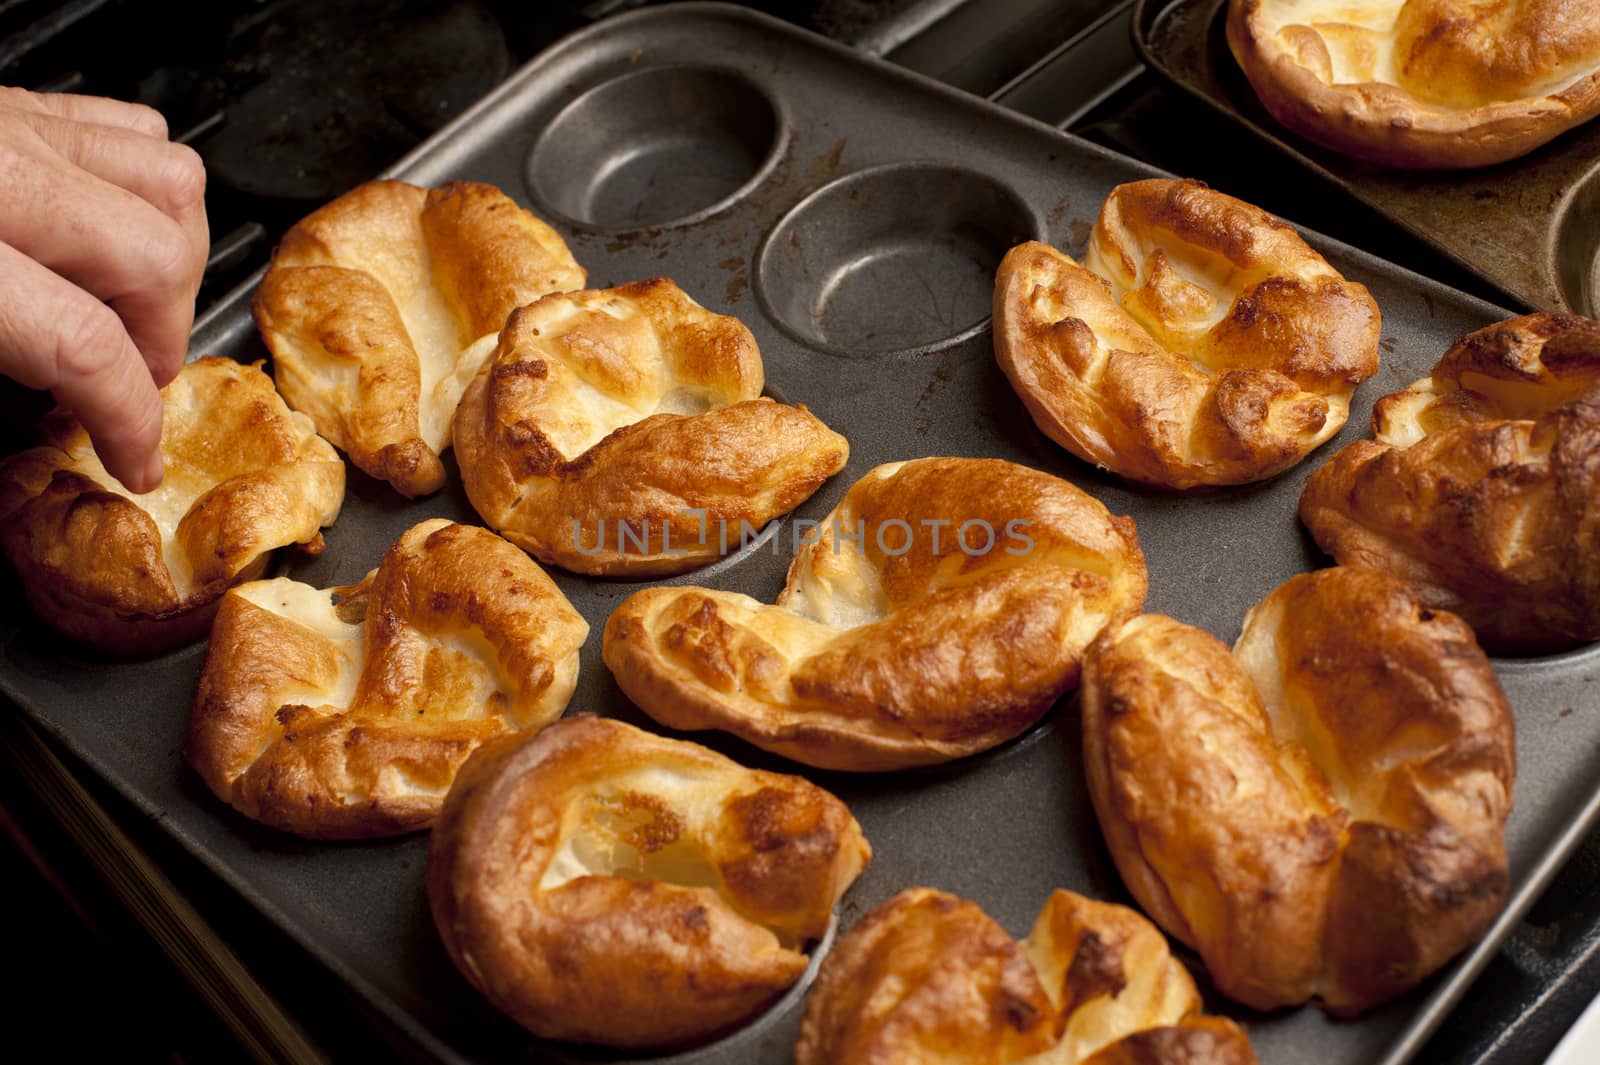 Man removing Yorkshire puddings from a baking tray by stockarch